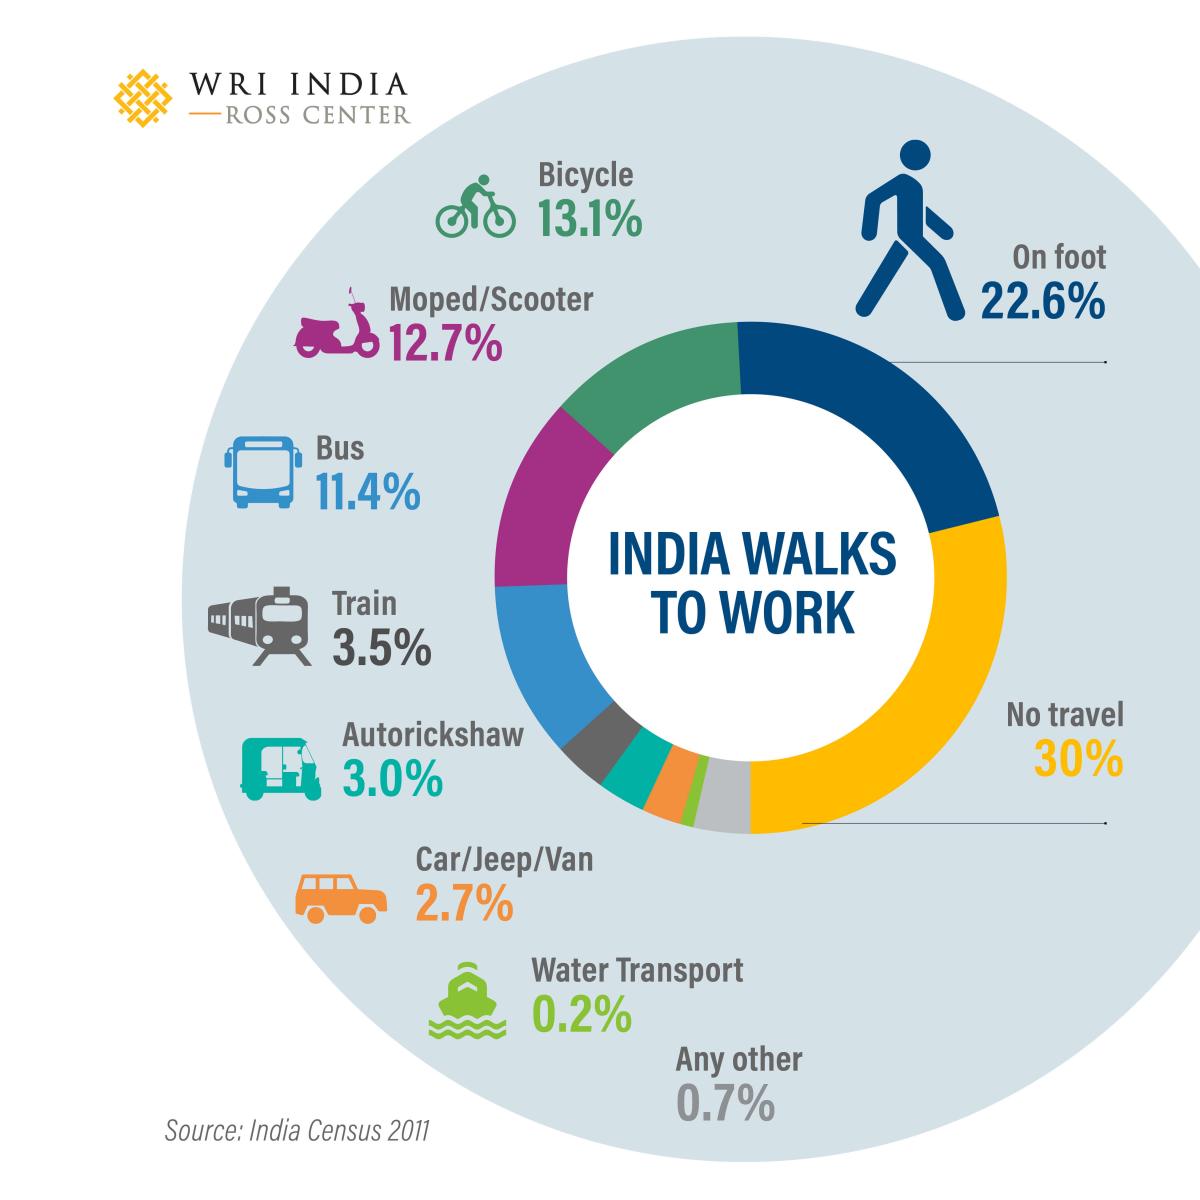 Only 3% of the population uses private cars to travel to work. Source: WRI India